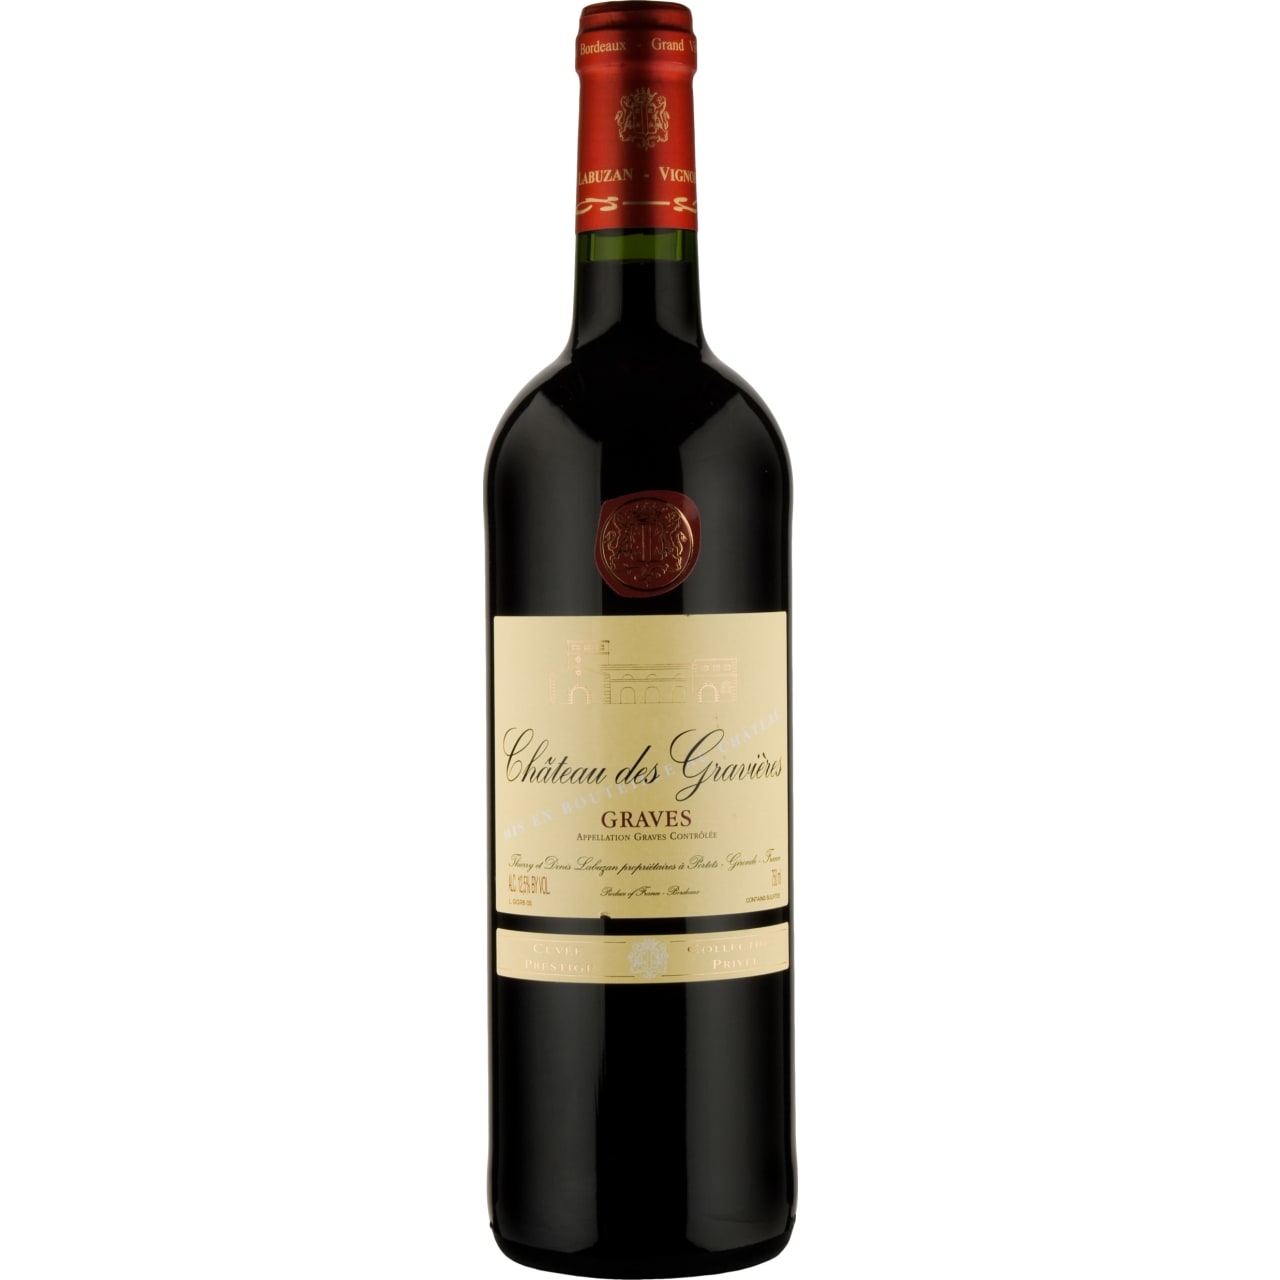 A fantastic value classic Graves red that delivers loads of pleasure at a very modest price. Fleshy and robust with notes of toasty wood, prunes and liquorice.